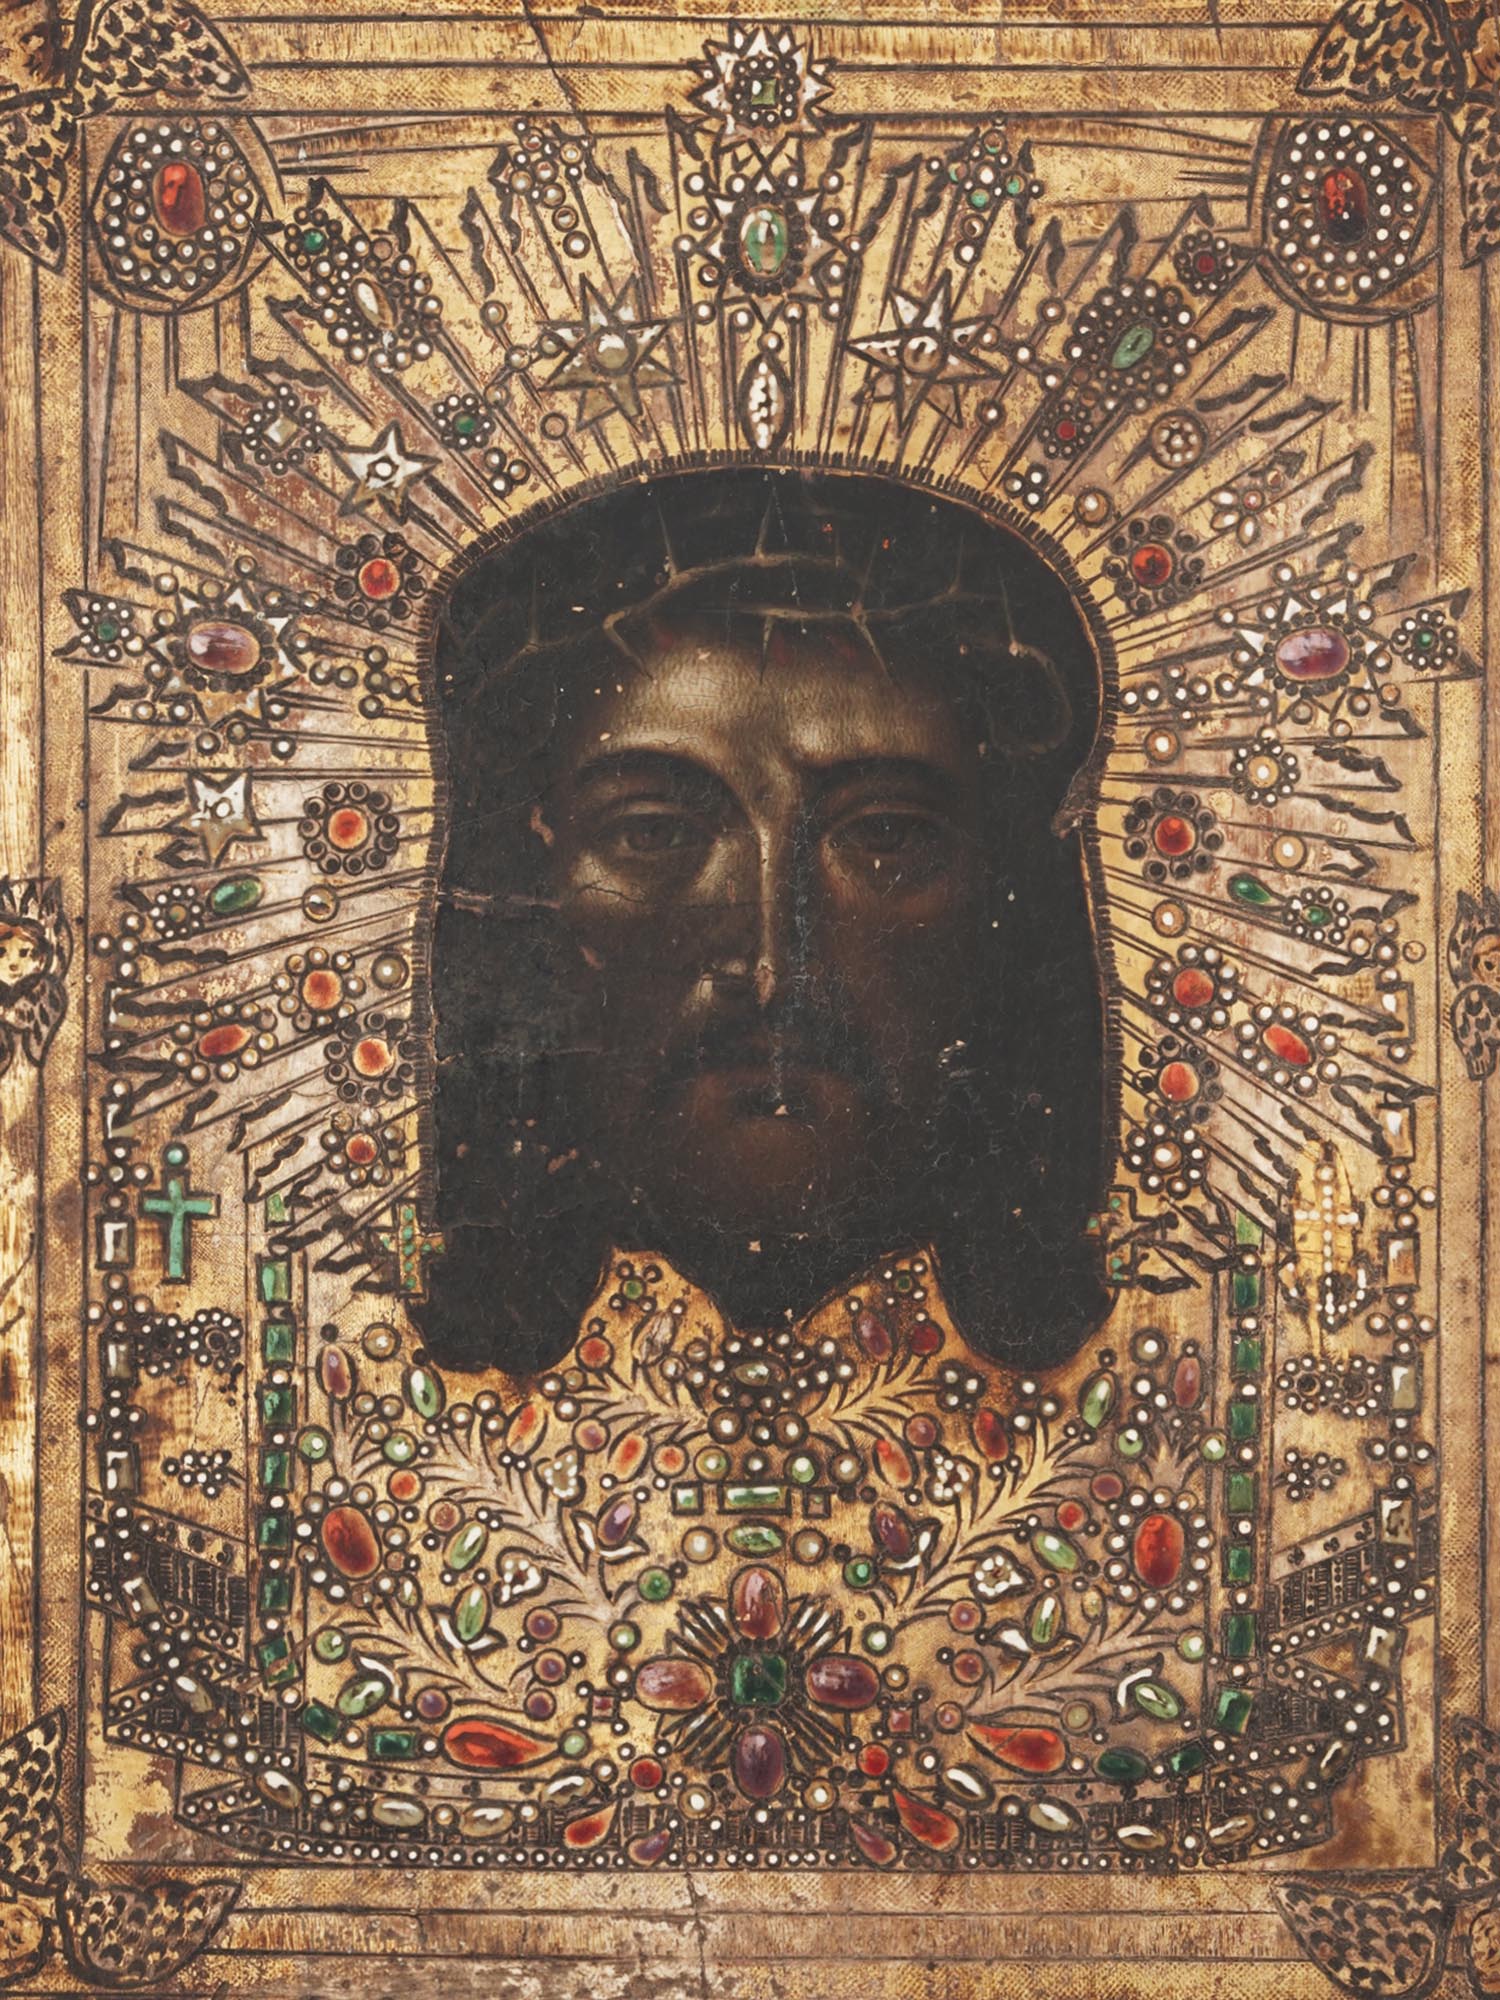 ANTIQUE RUSSIAN ICON HOLY FACE OF JESUS CHRIST PIC-1